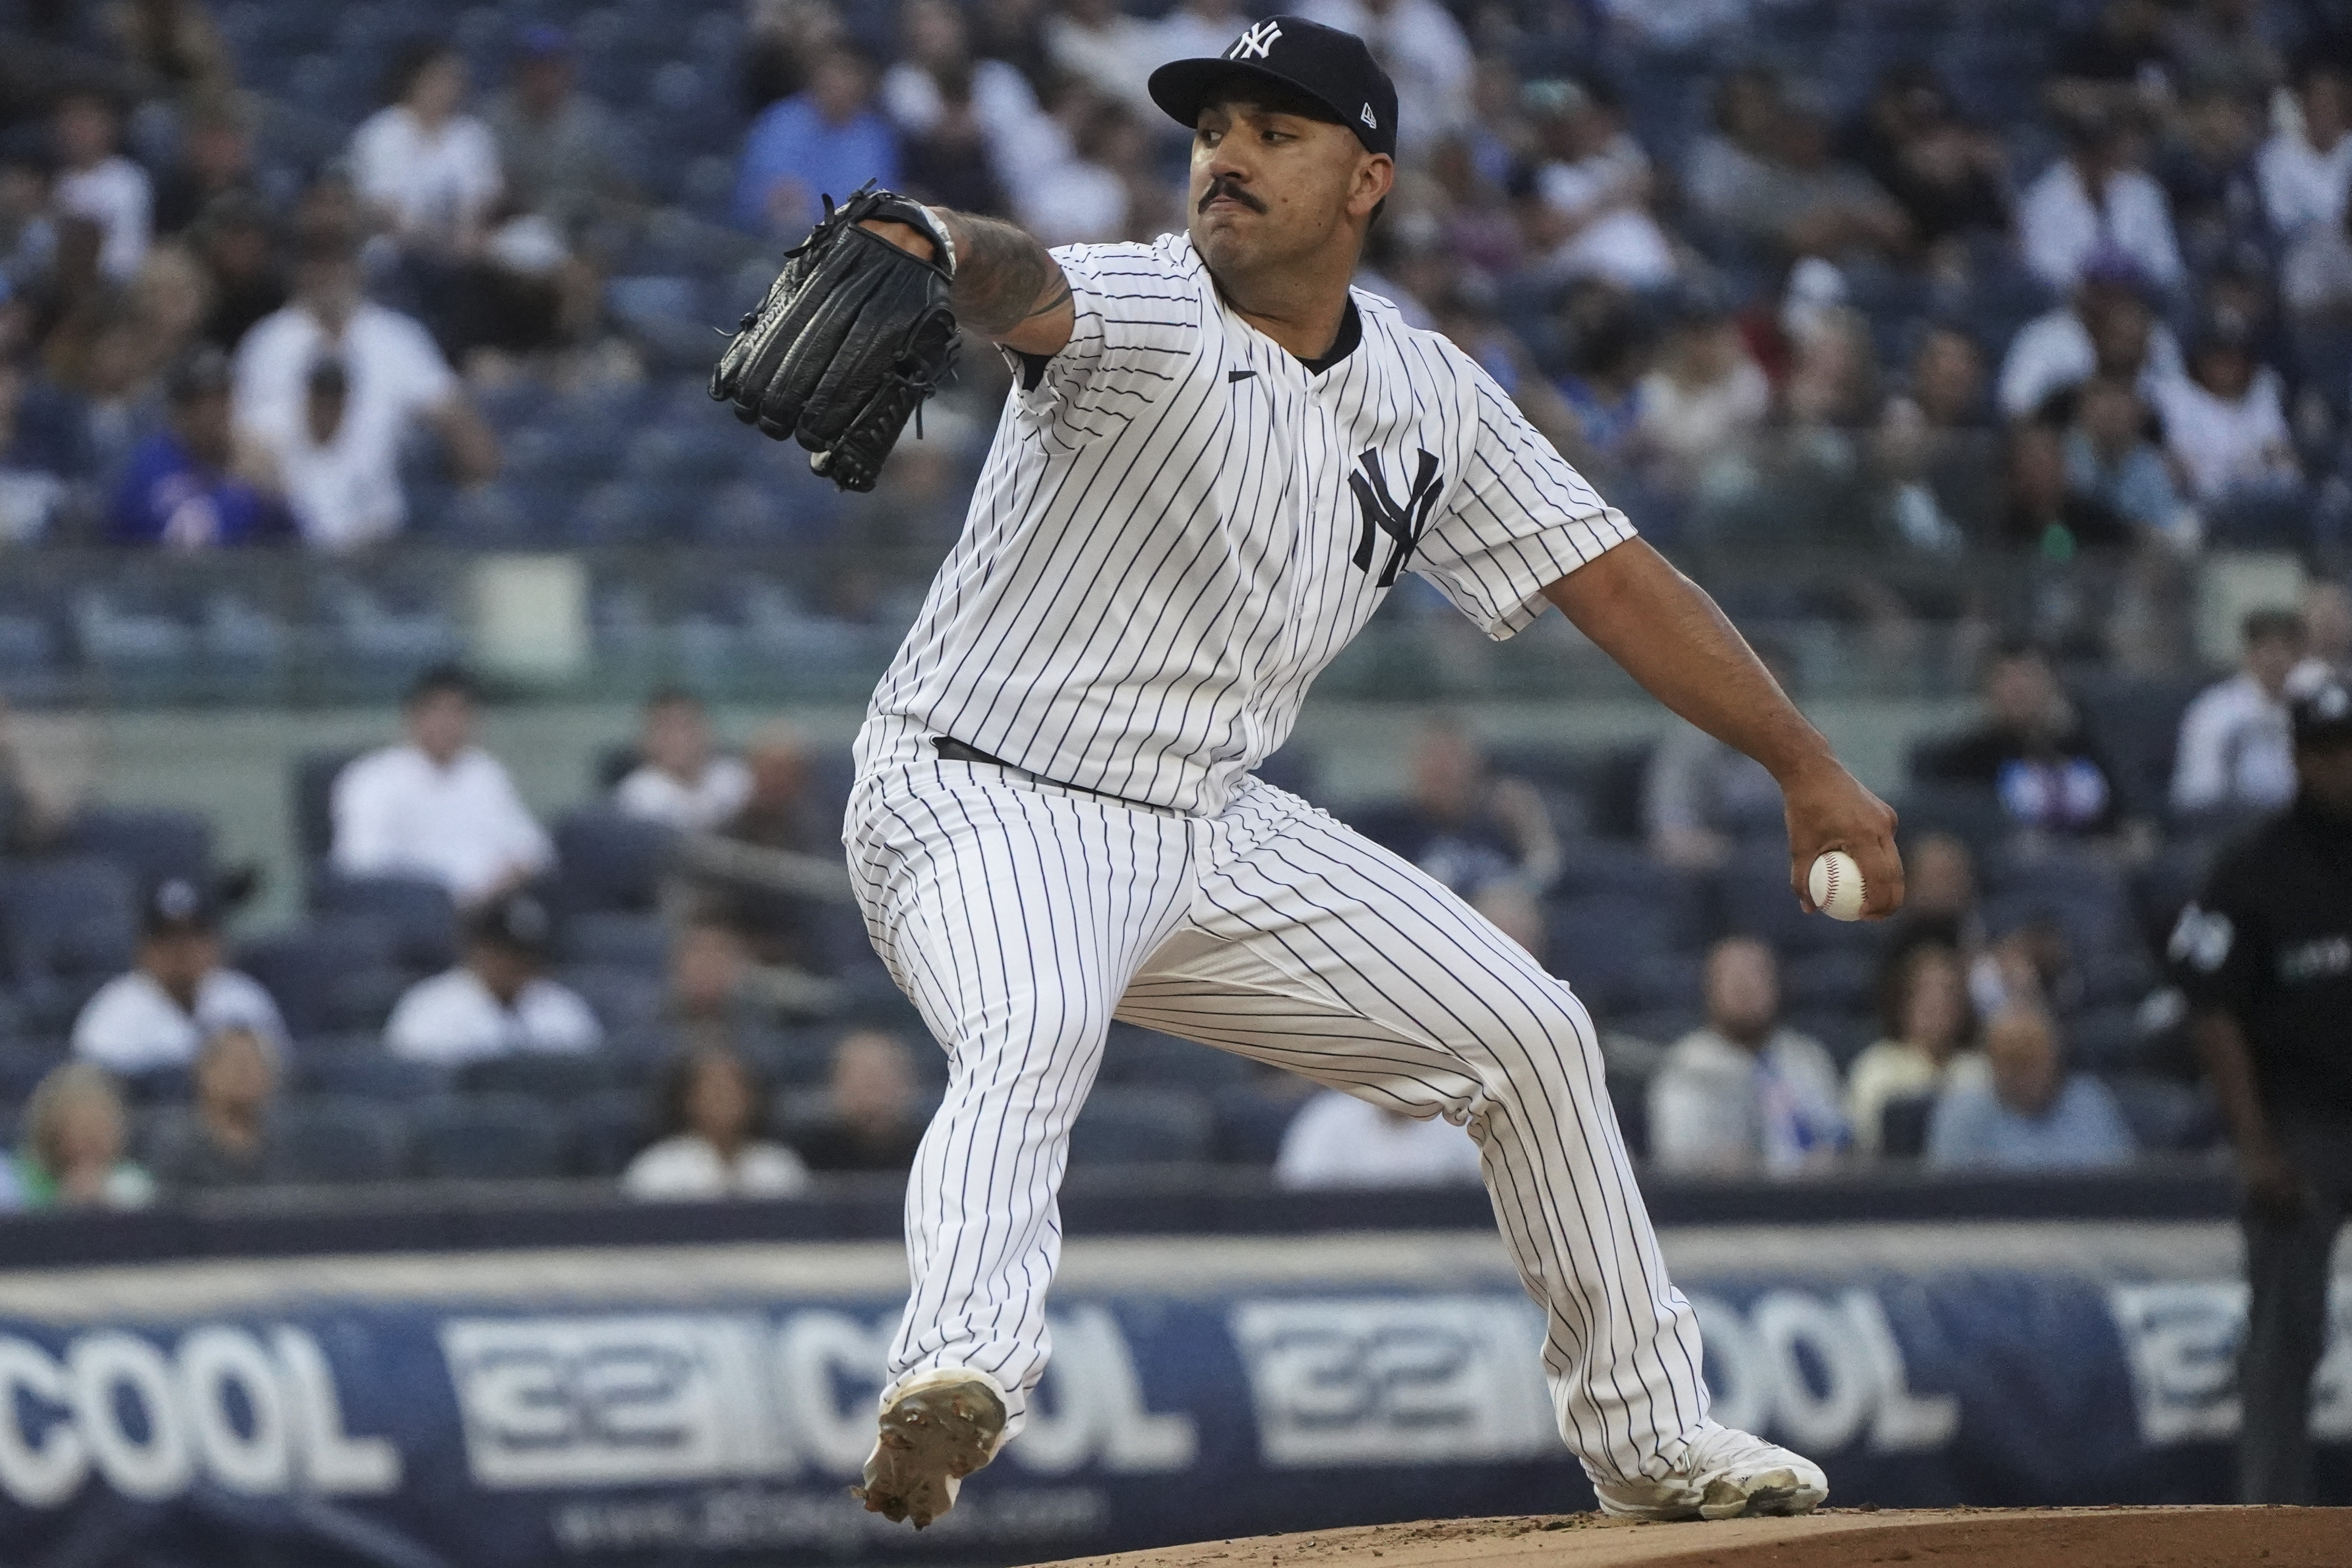 Yankees' Nestor Cortes dominates Rays in 7-2 victory at Tropicana